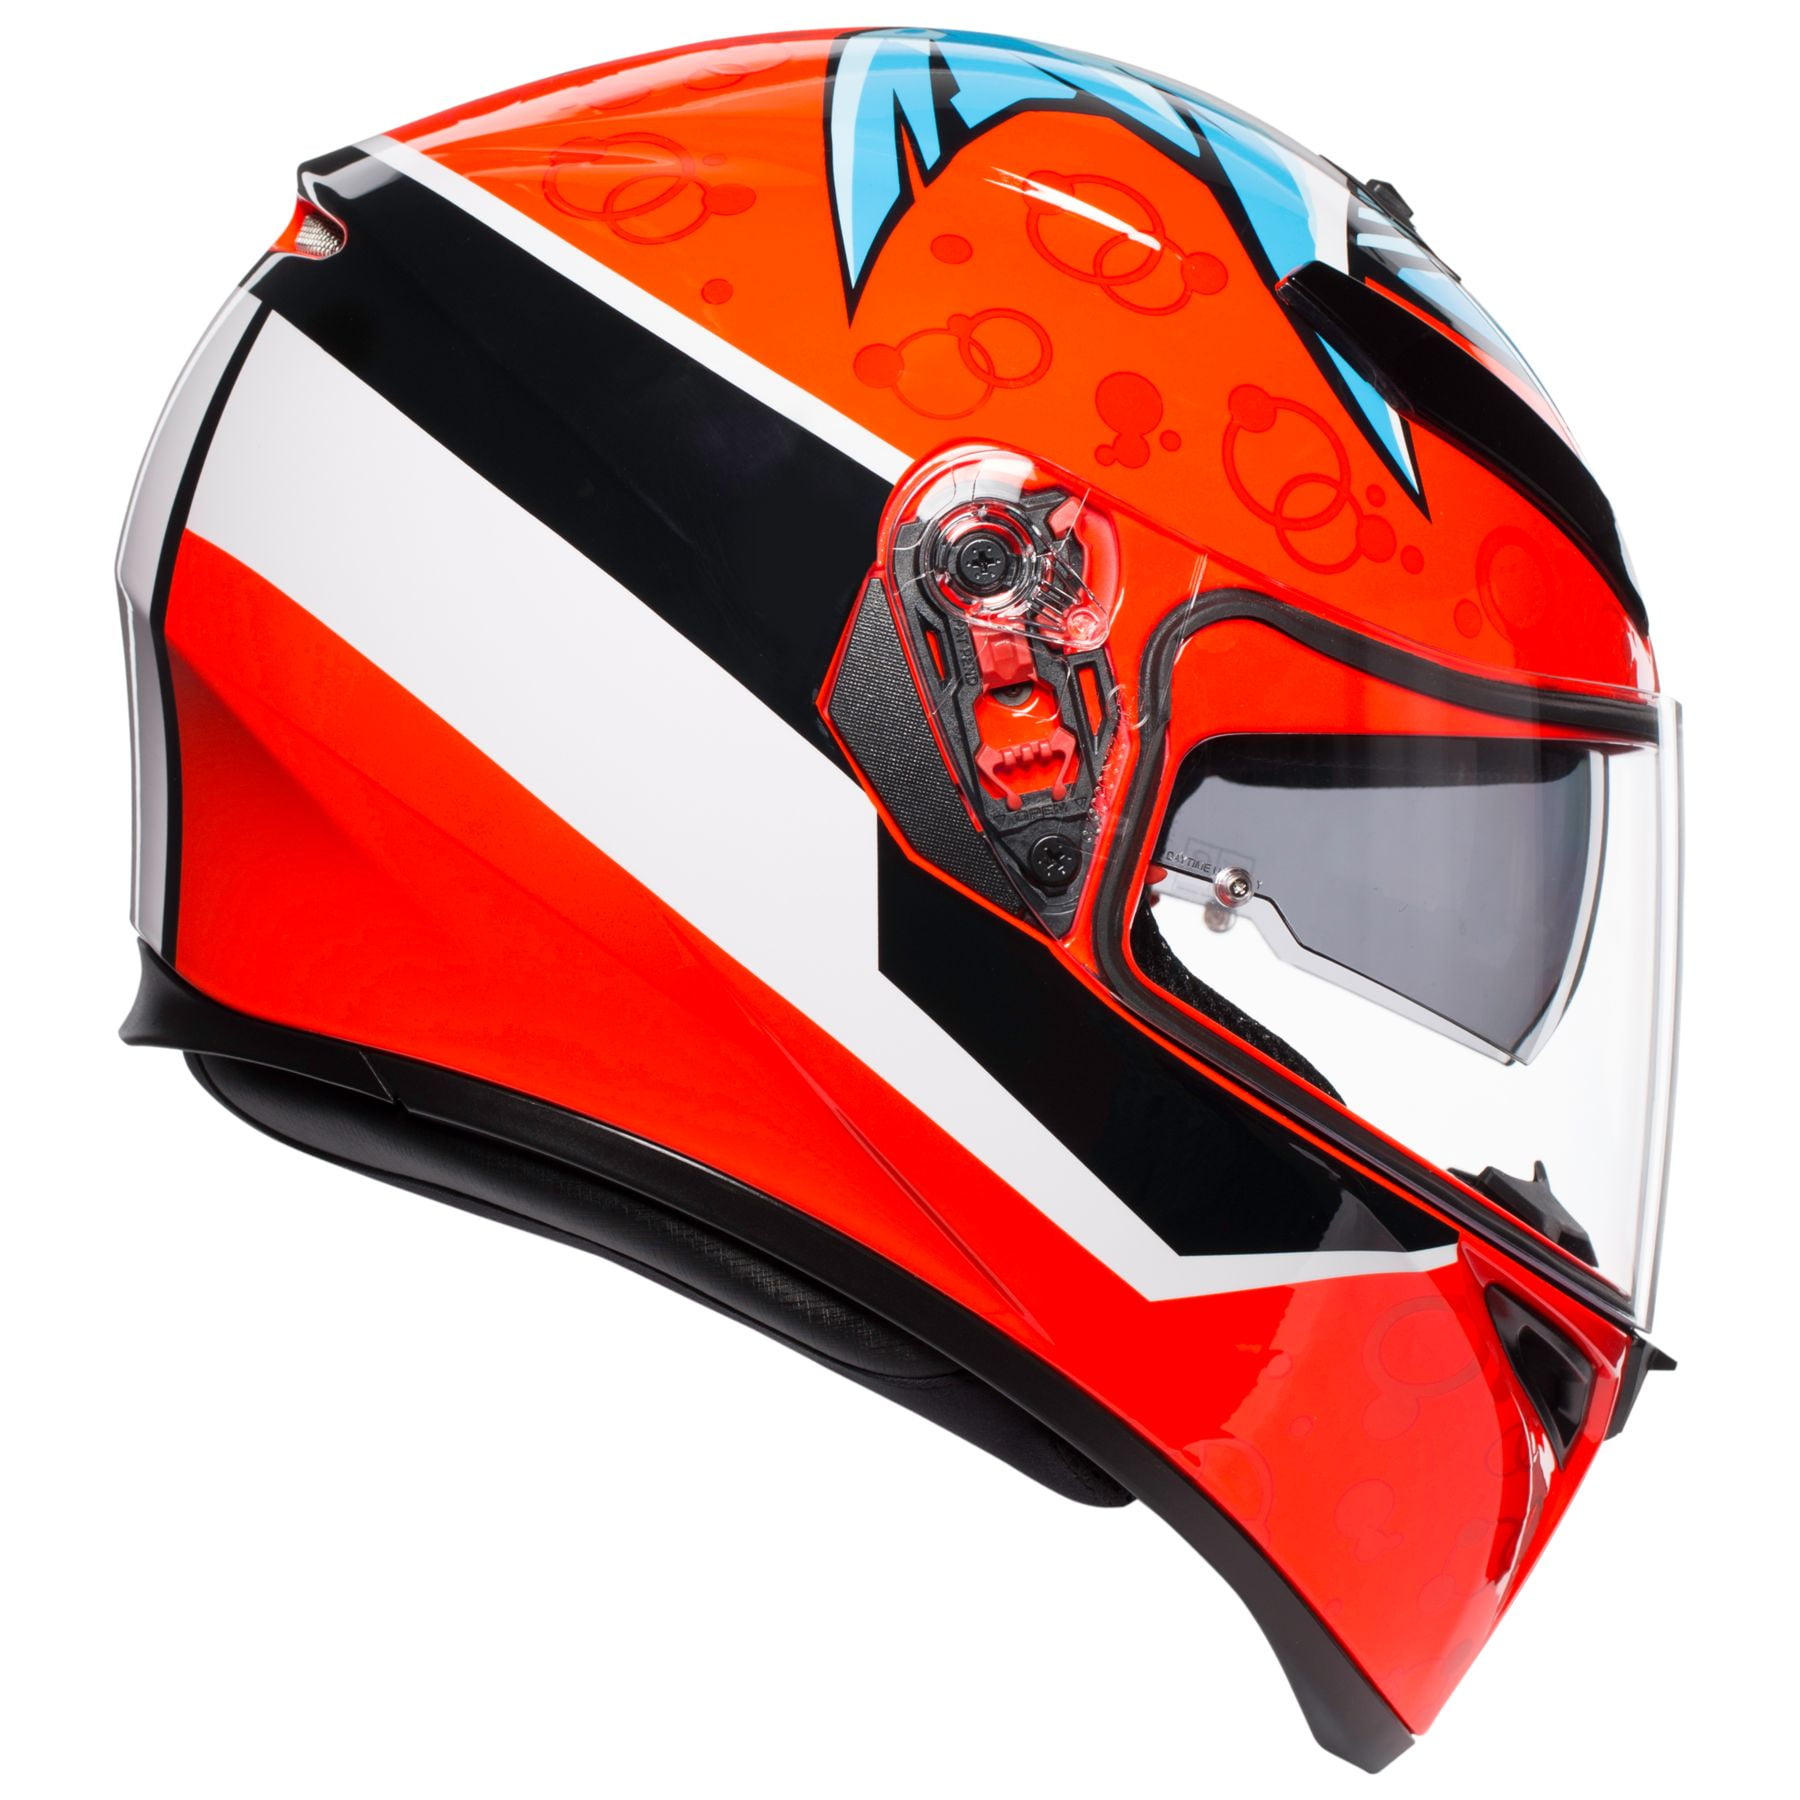 Protective Clothing Full-Face Helmets AGV K-3 SV E2205 Solid PLK Size ...